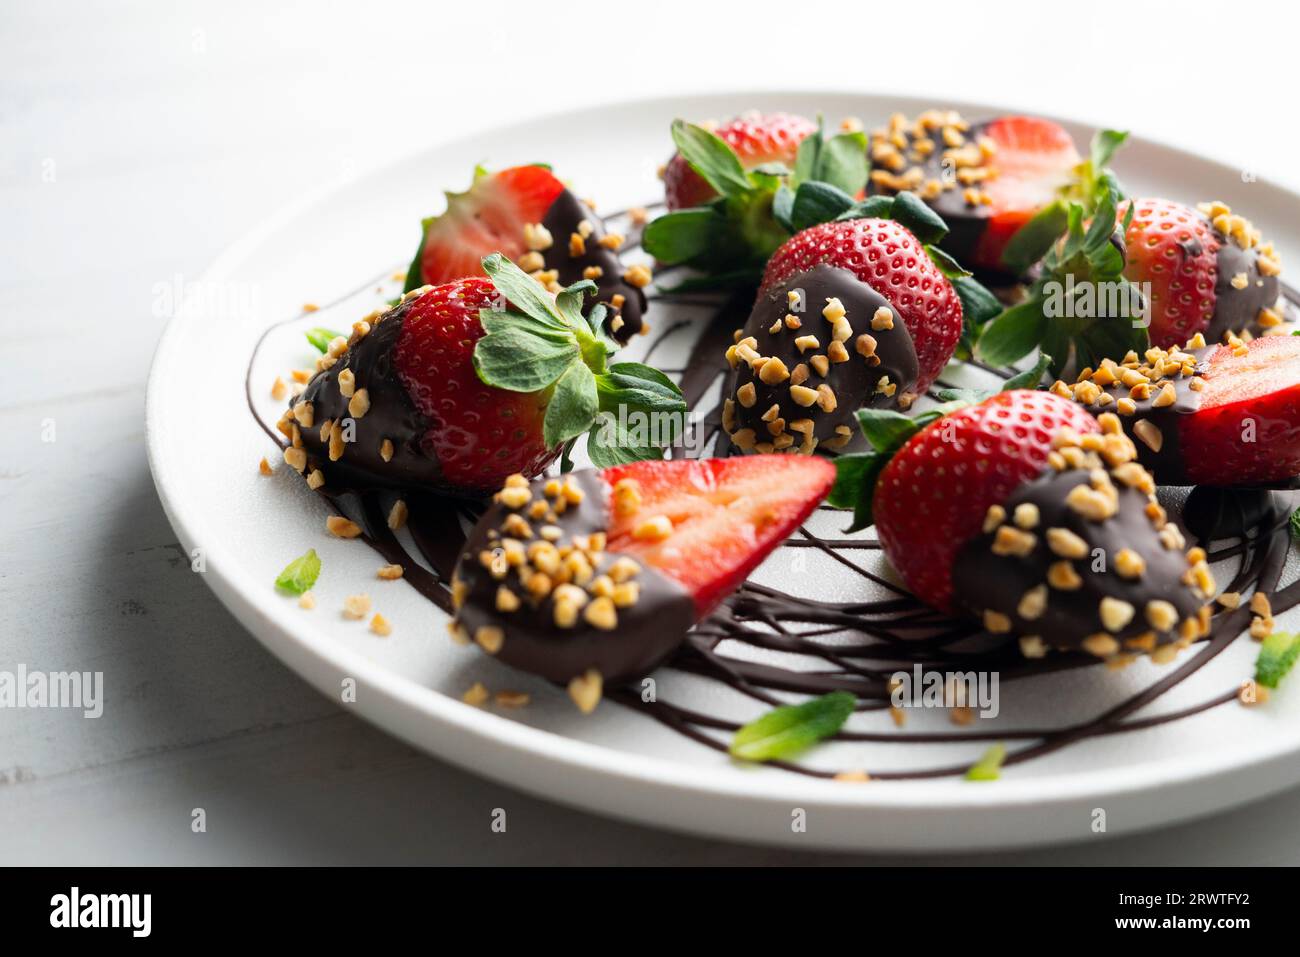 Strawberries dipped in dark chocolate and coated with toasted almonds. Stock Photo